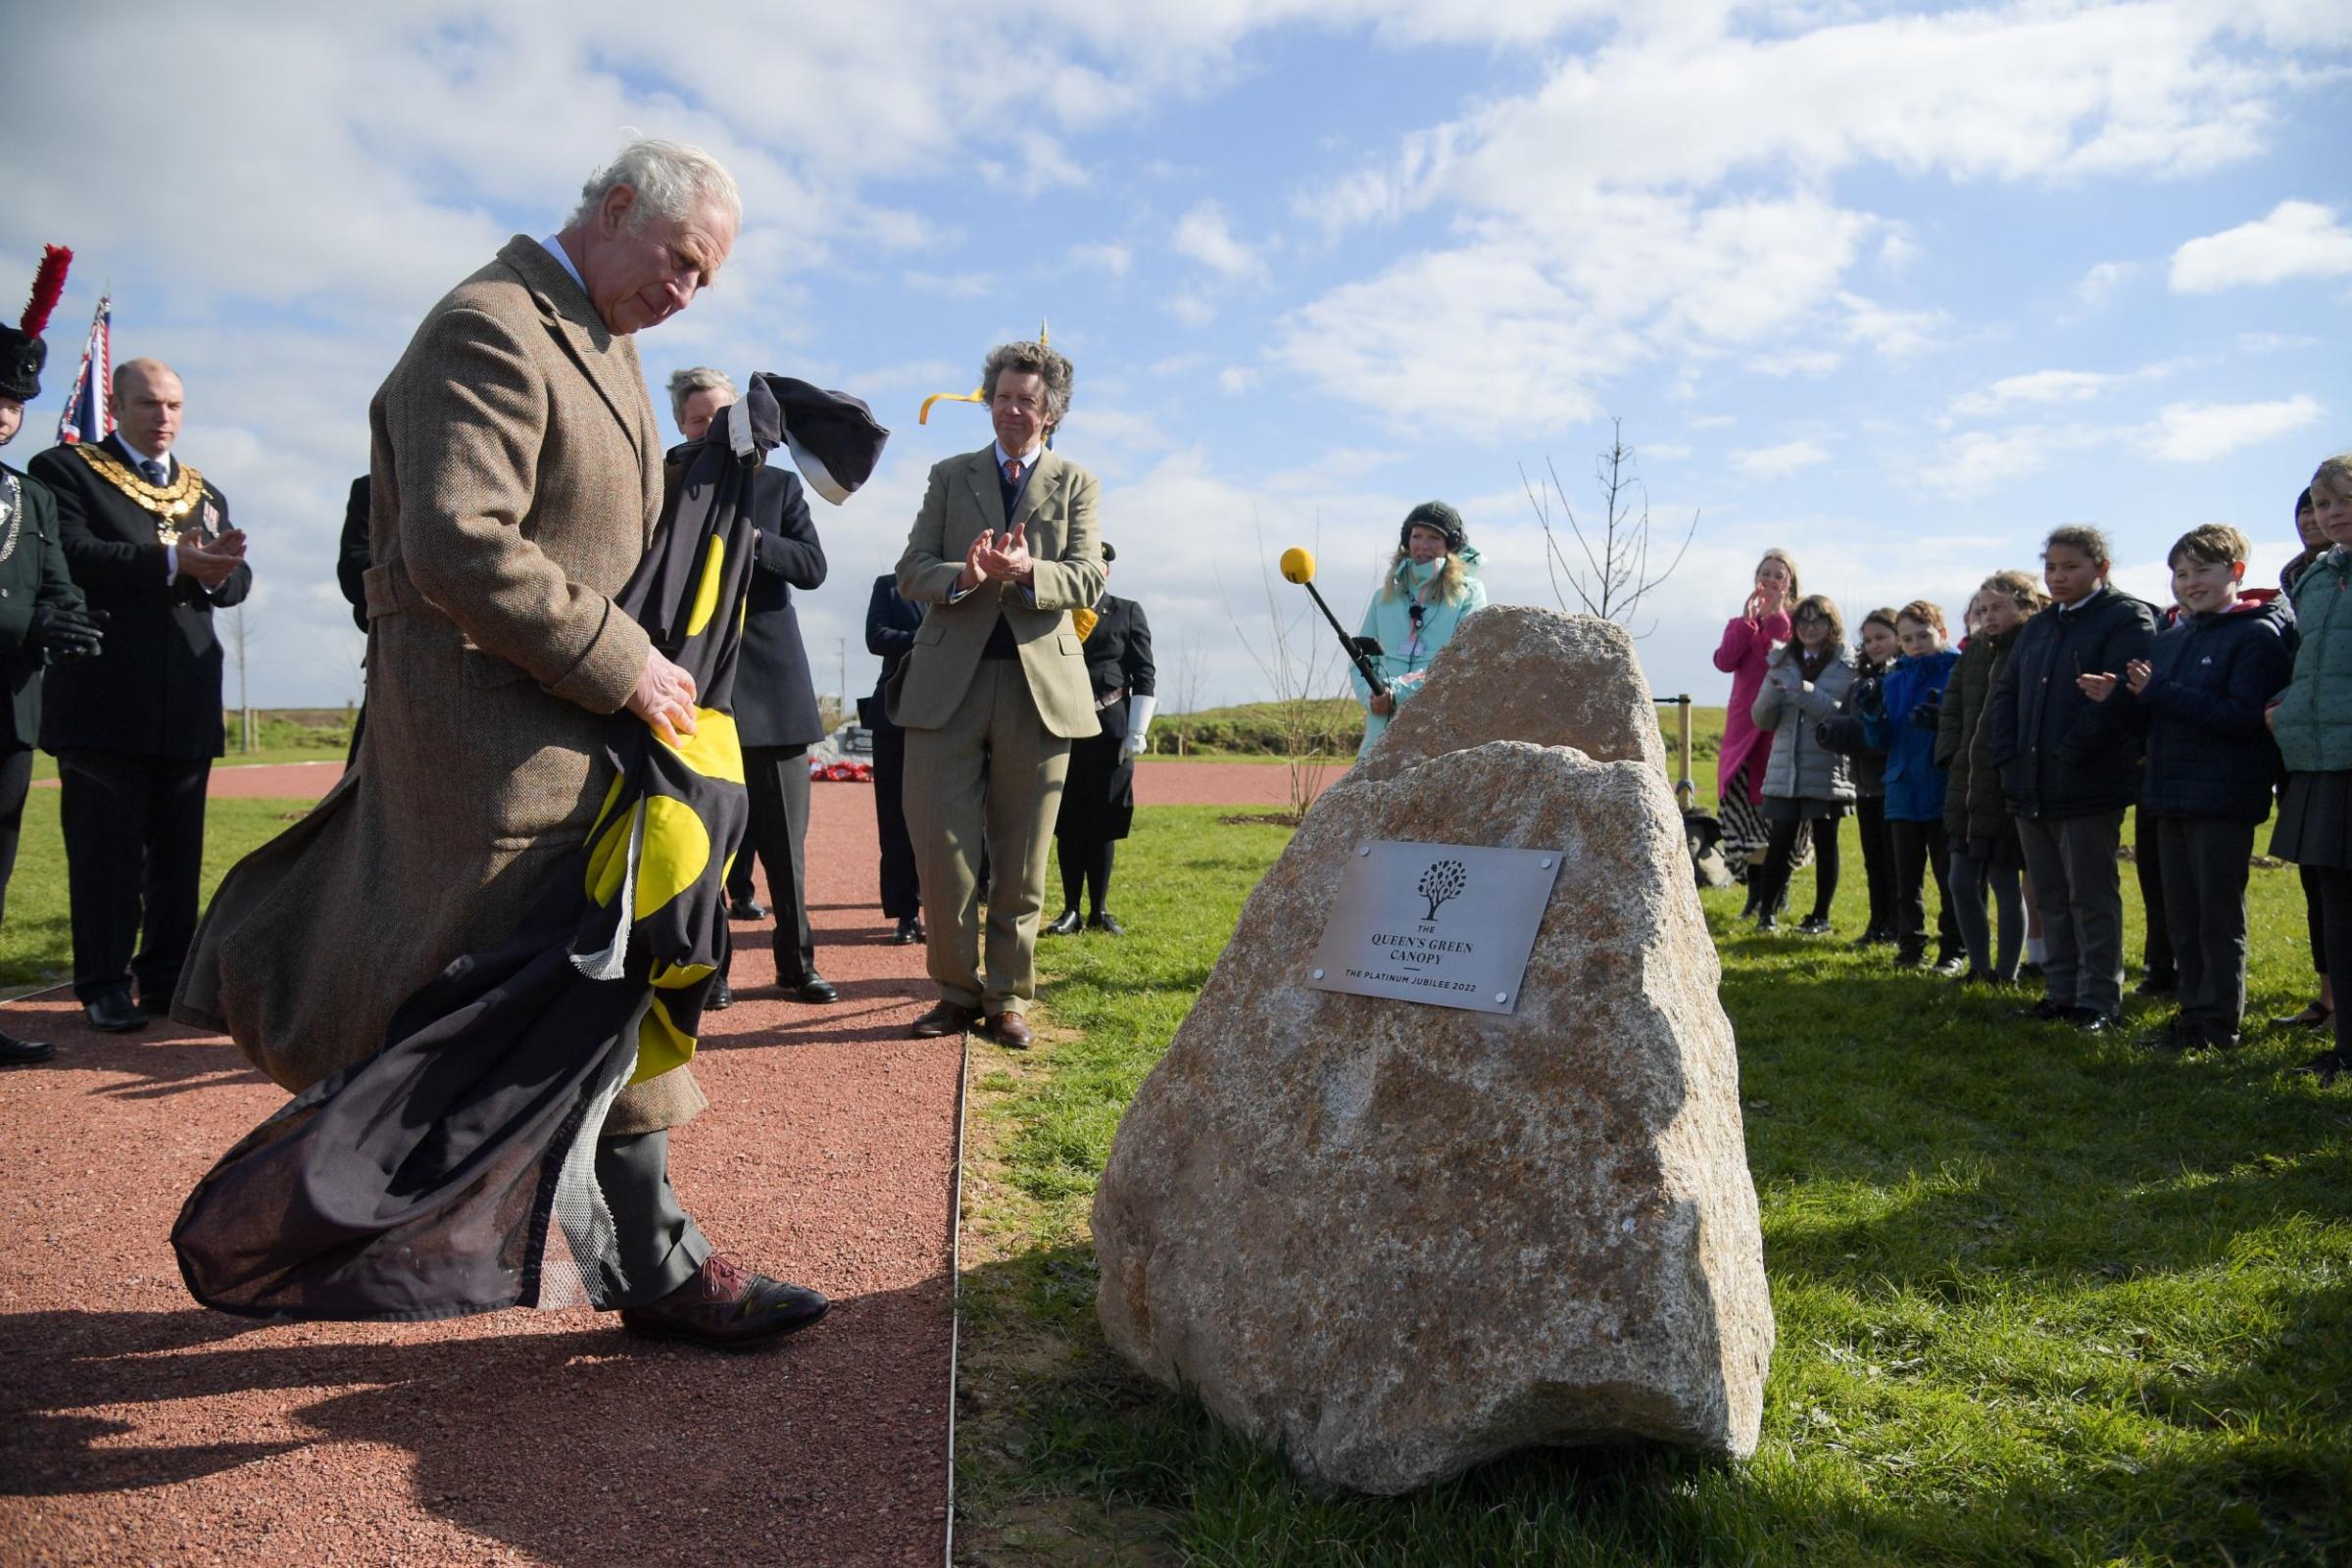 The Prince of Wales, who is also known as the Duke of Cornwall unveils The Queens Green Canopy Platinum Jubilee 2022 plaque during a visit to the recently planted Royal British Legion Centenary Picture: PA Wire